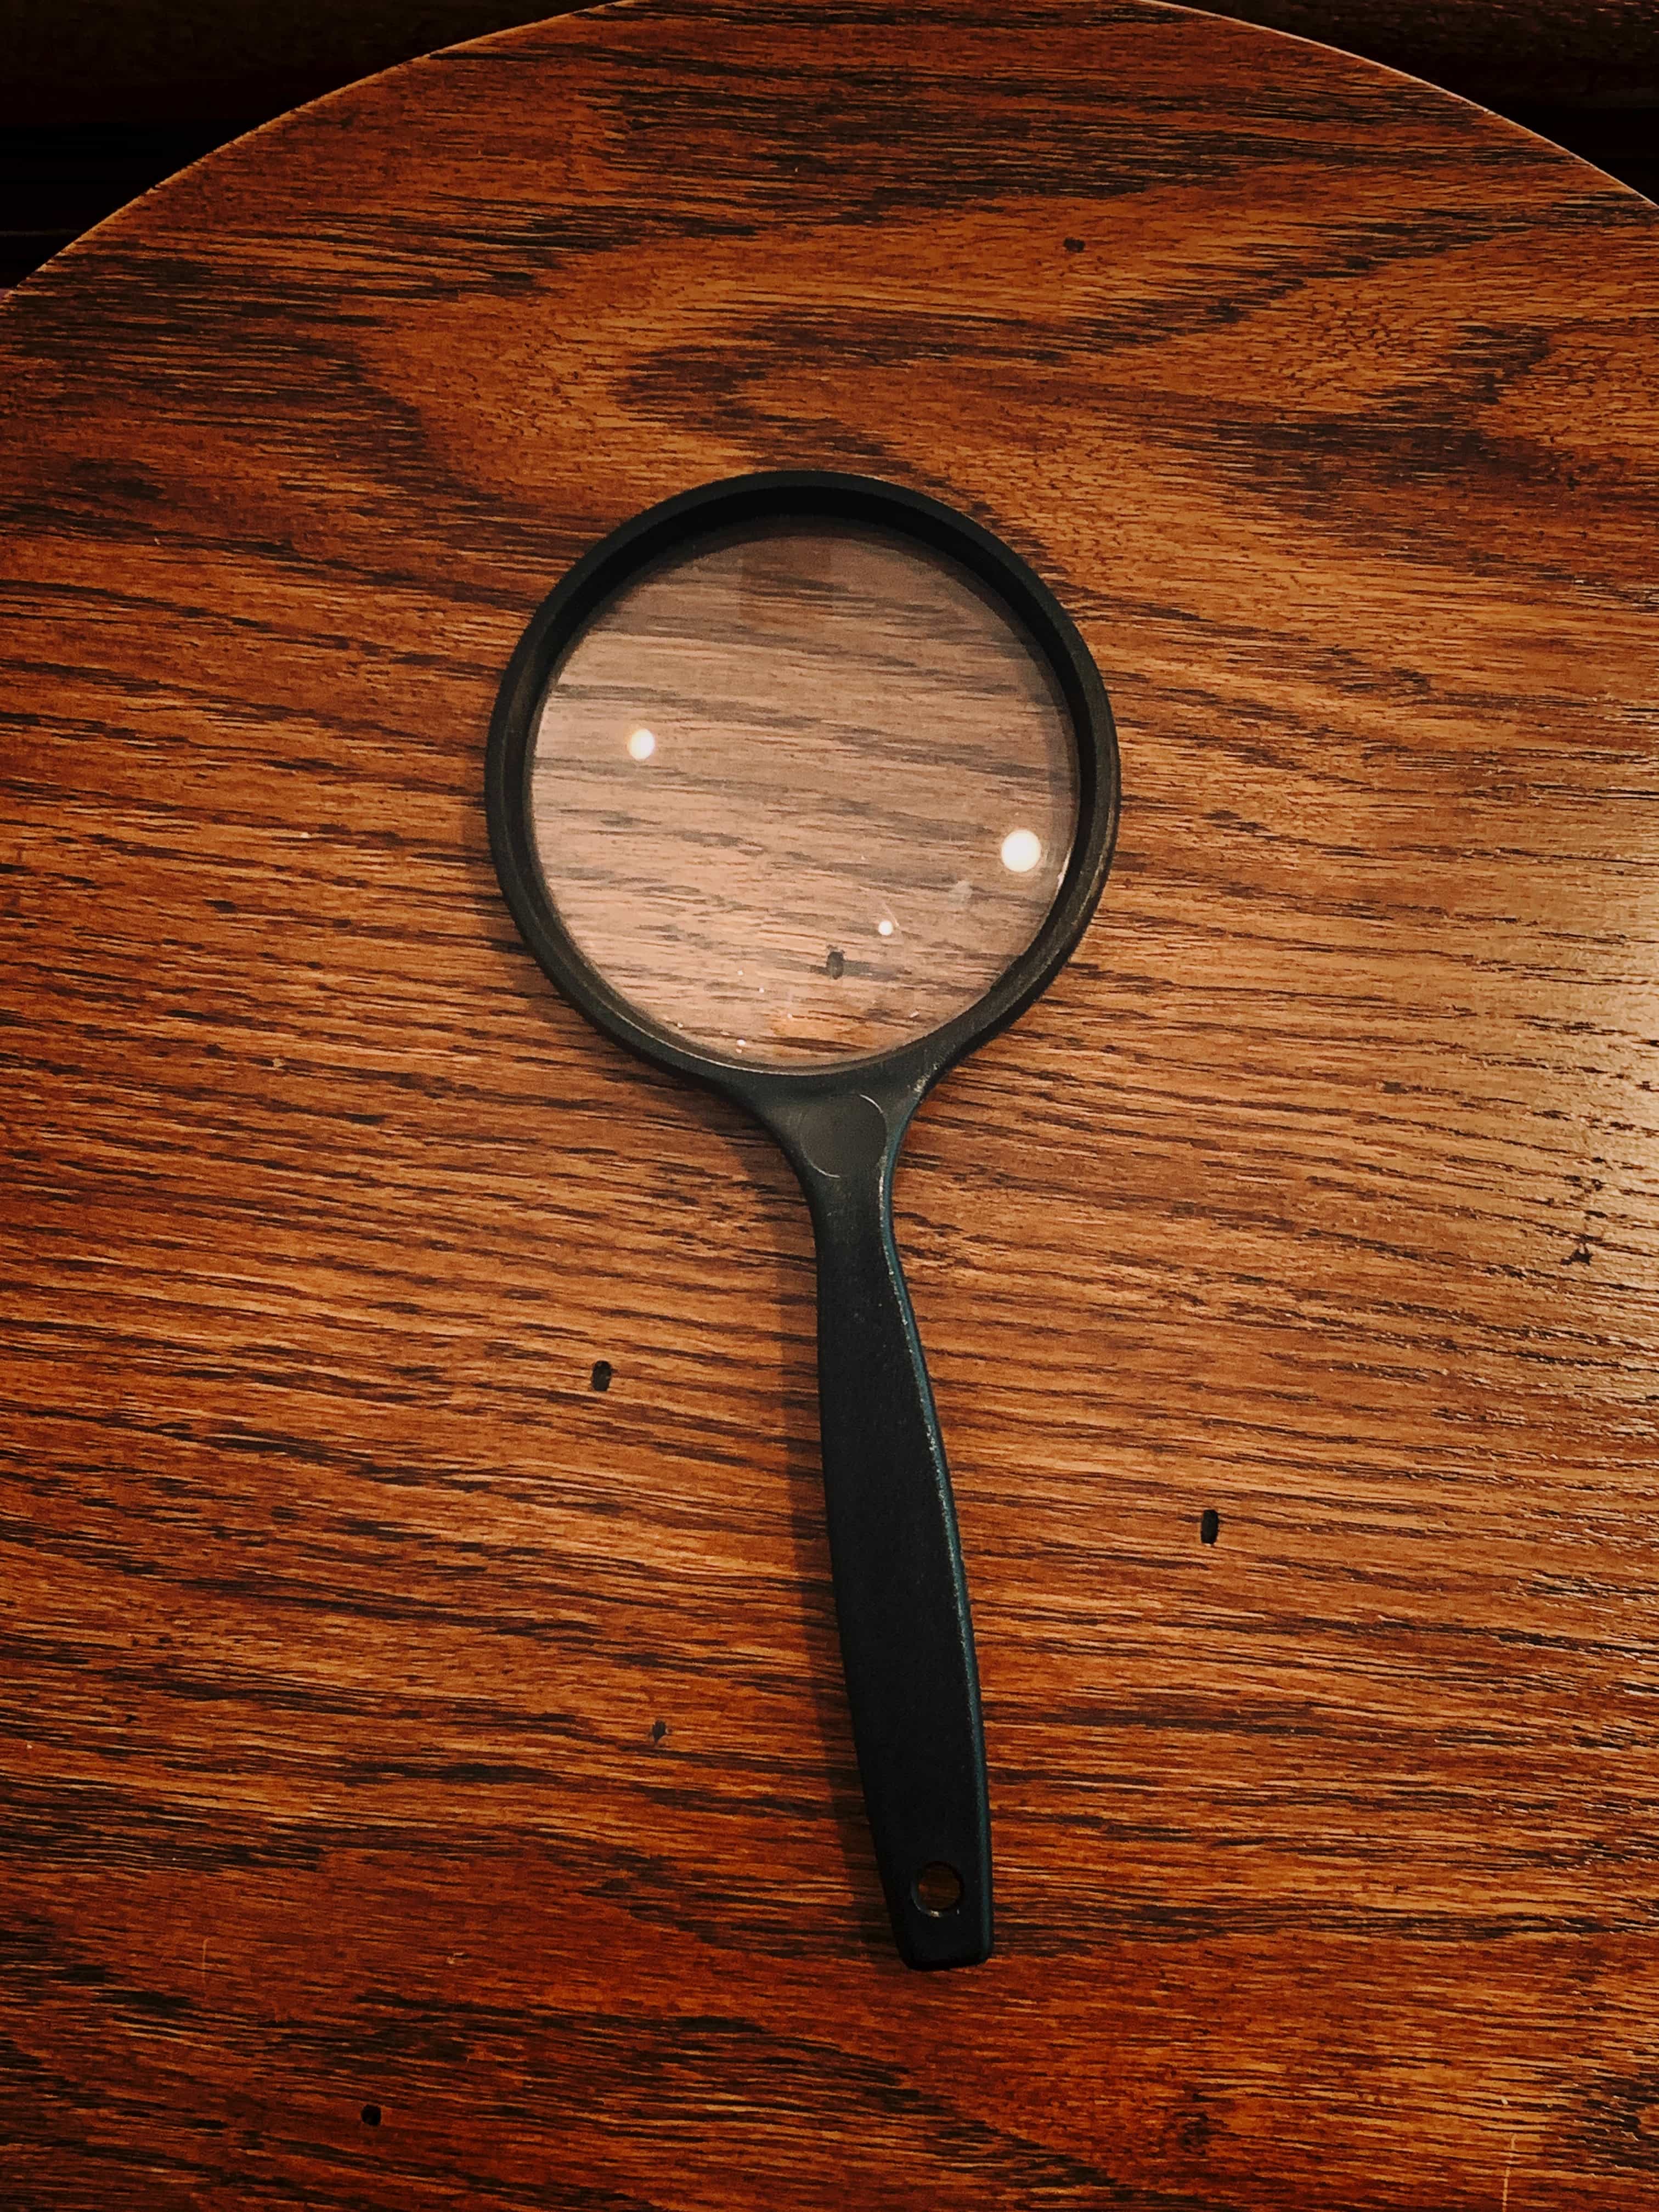 Avoid These Common Filmmaking Mistakes - An image of a magnifying glass